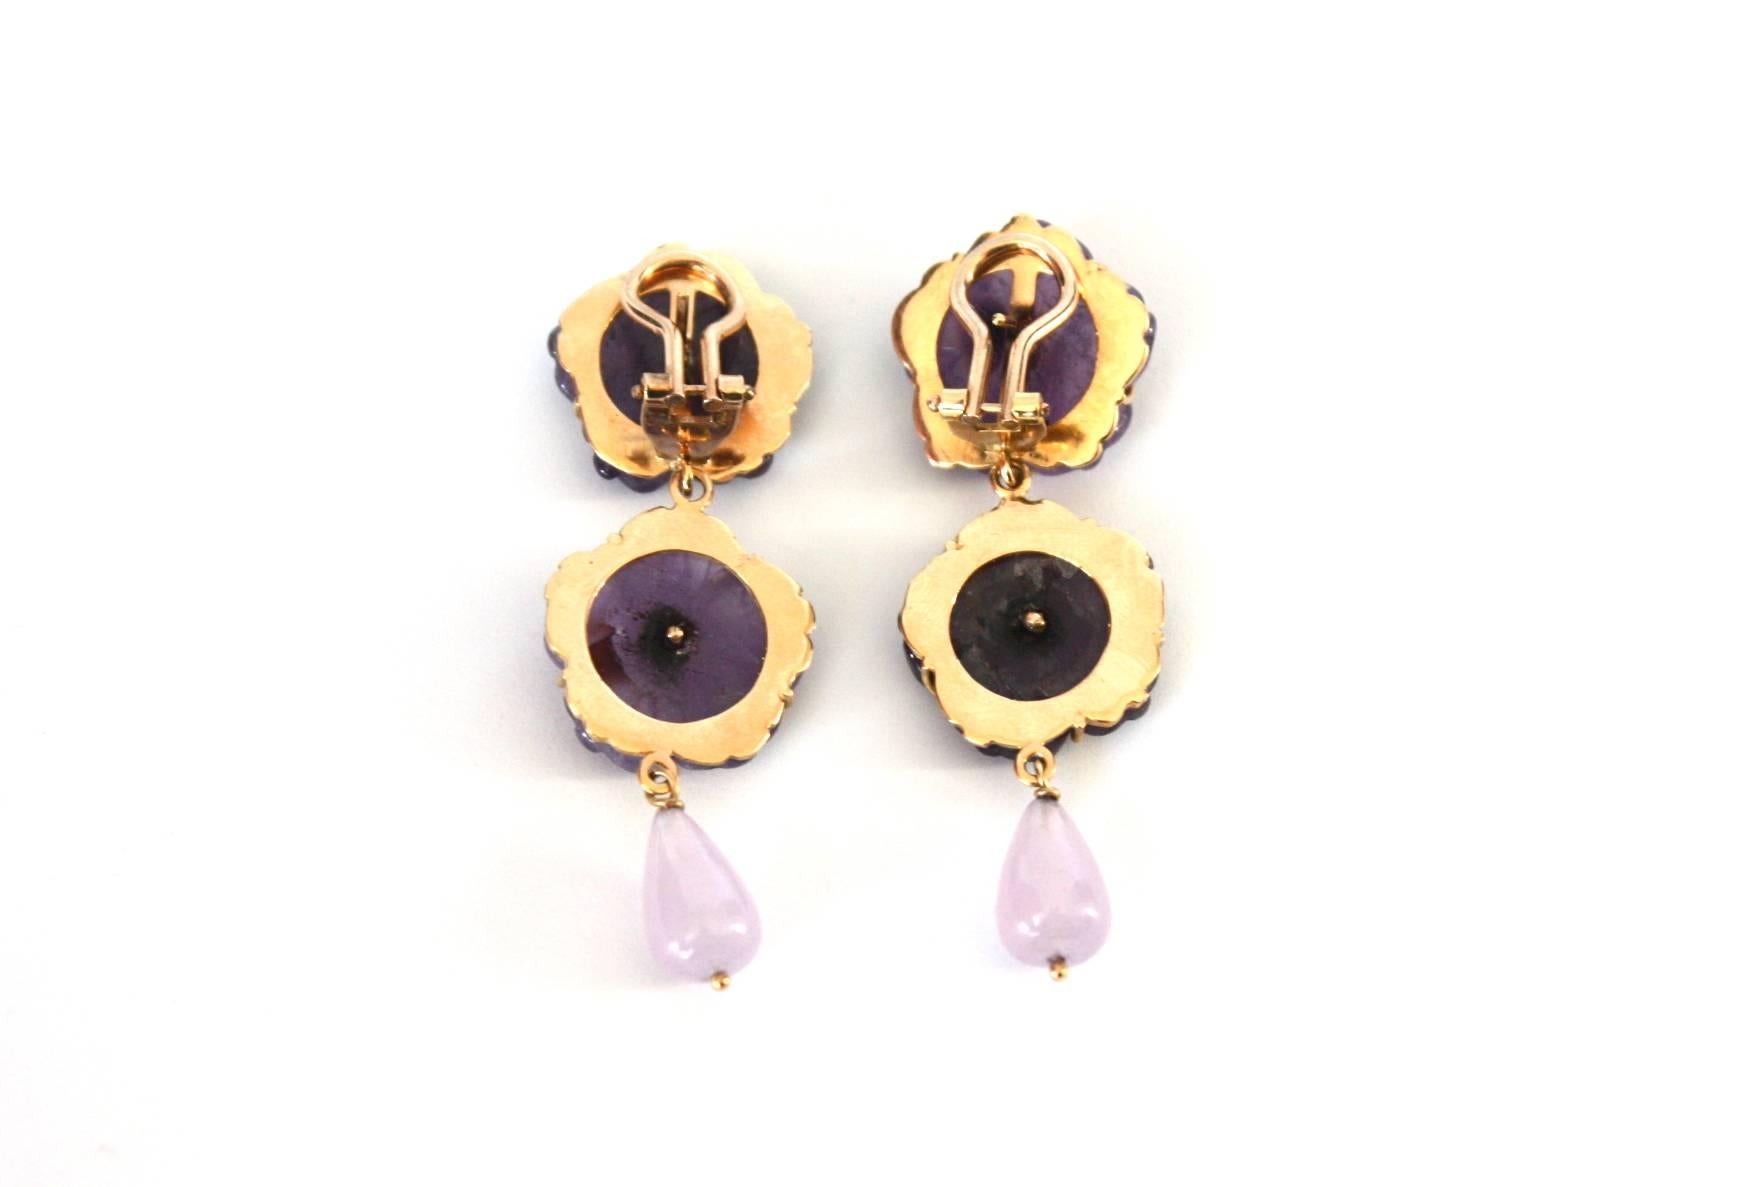 Very nice earrings with flower engrave in amethyst stone, diamonds and emerald, yellow 18kt gold gr. 10,50, drop of rose quartz. Weight 9,2 gr length 5cm
All Giulia Colussi jewelry is new and has never been previously owned or worn. Each item will